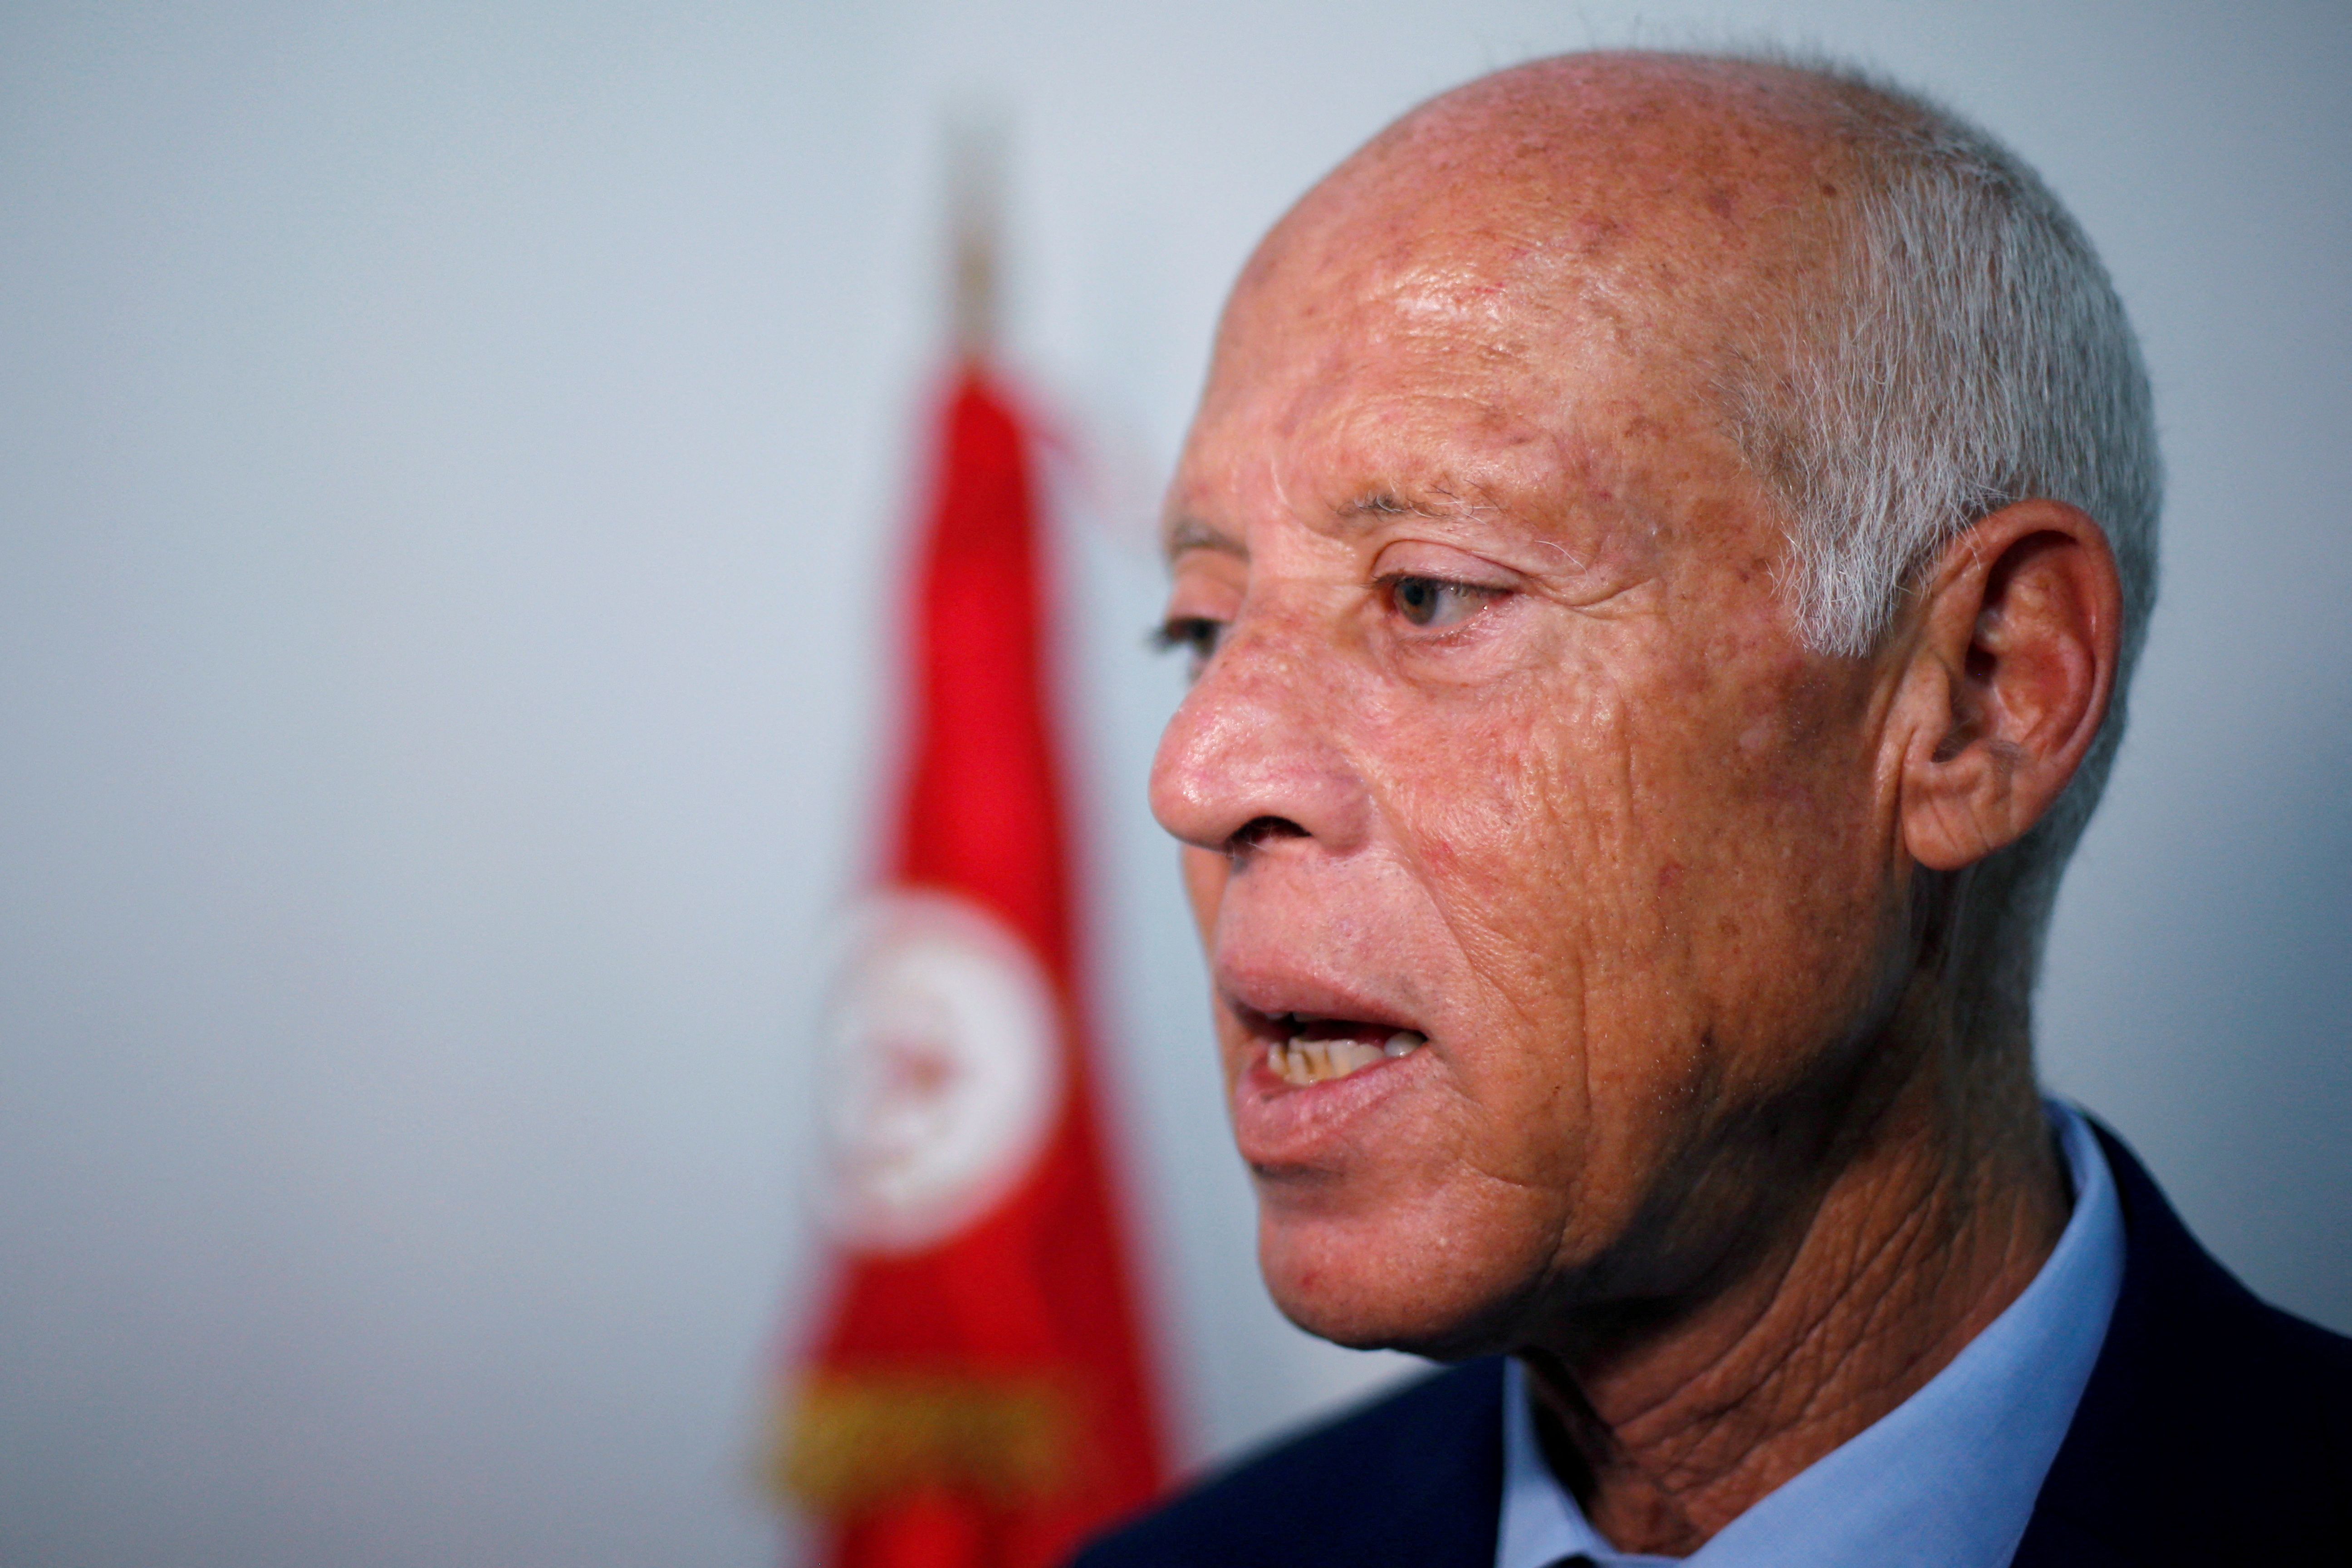 Presidential candidate Kais Saied speaks during an interview with Reuters in Tunis